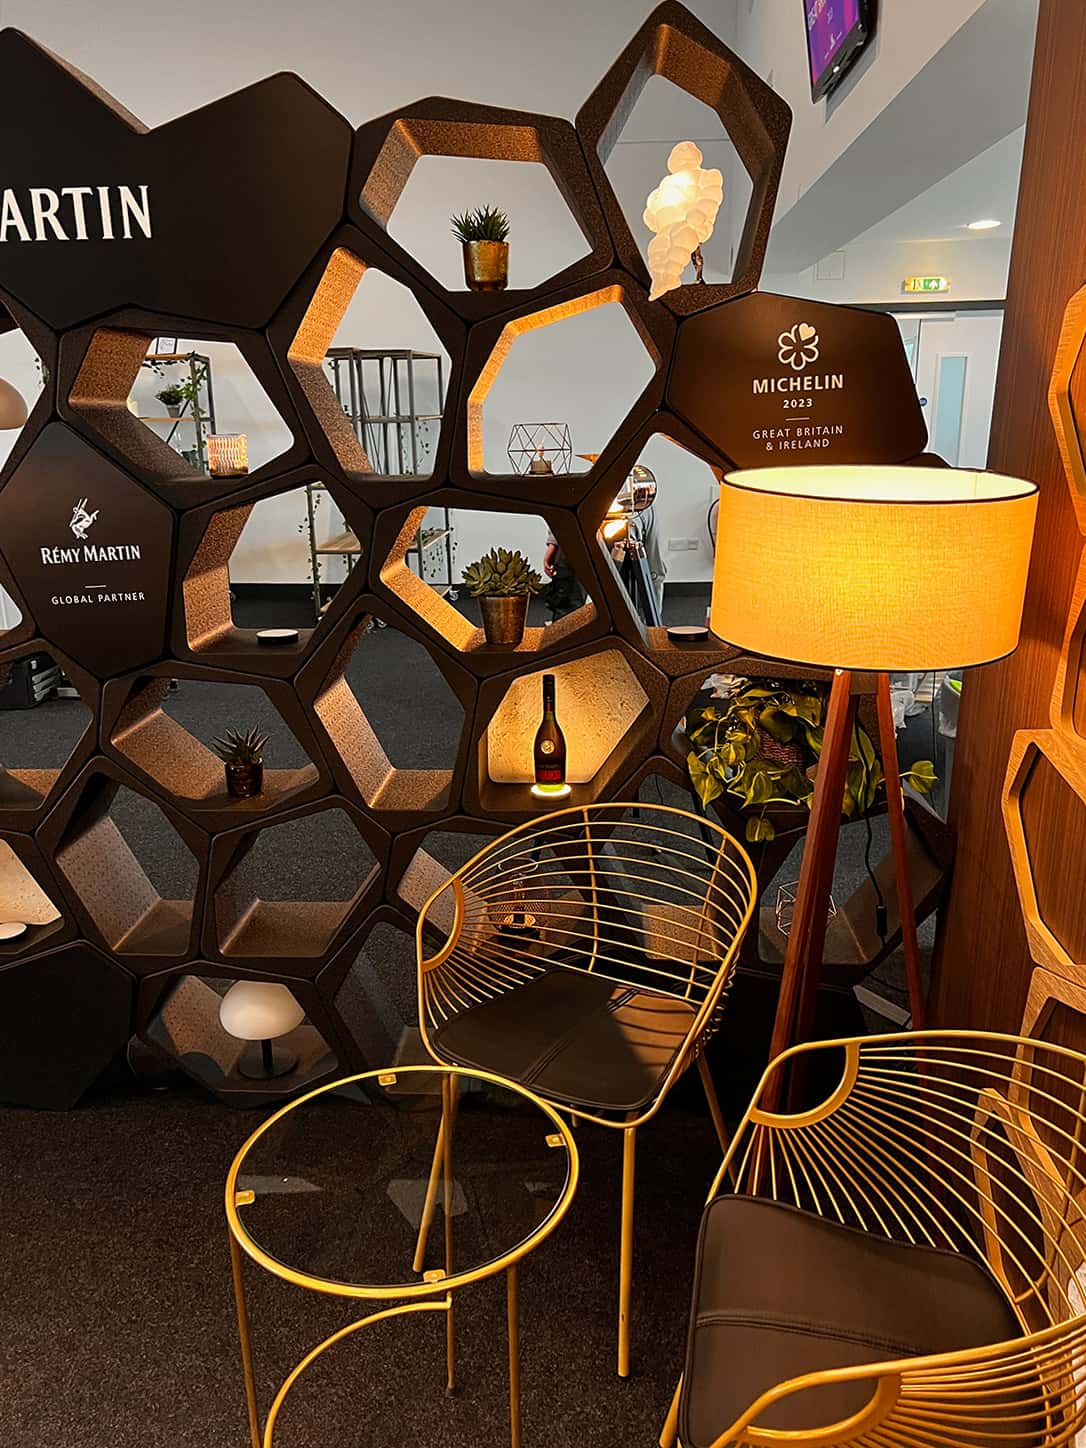 freestanding partiton display Stands design Remy Martin Michelin creative space solutions